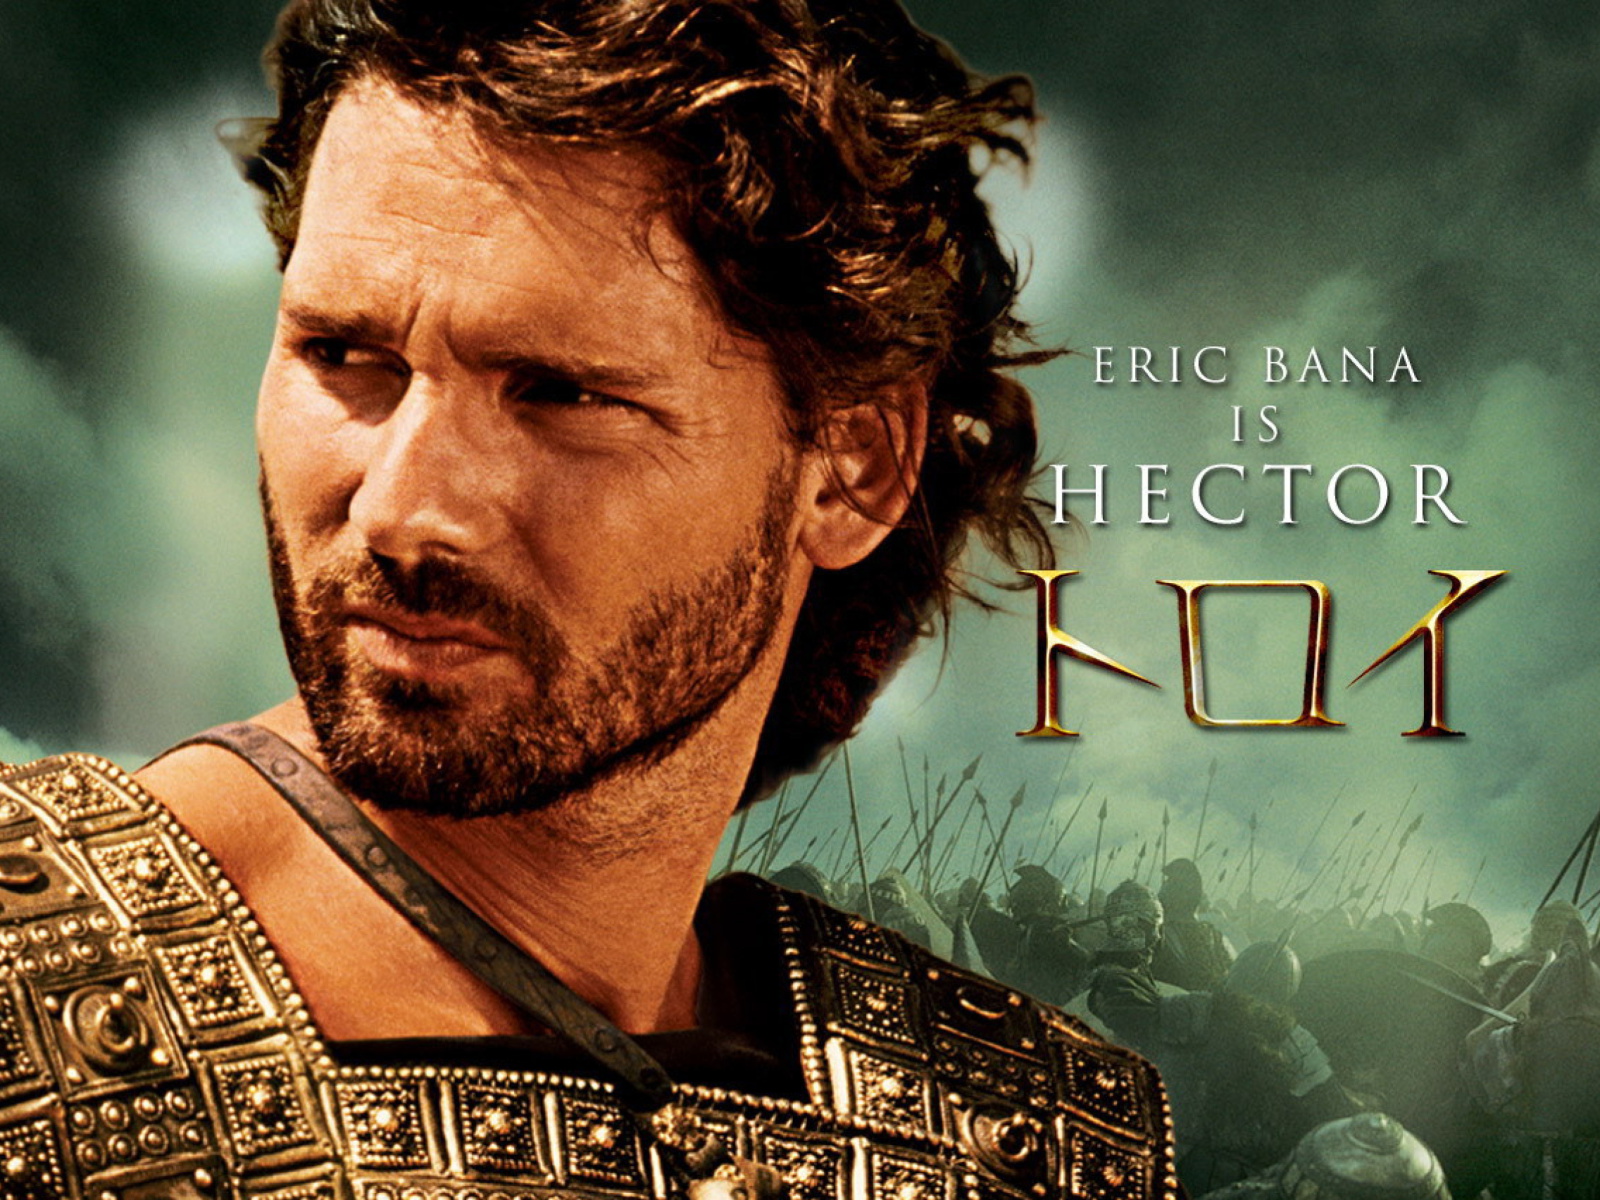 Eric Bana as Hector in Troy wallpaper 1600x1200